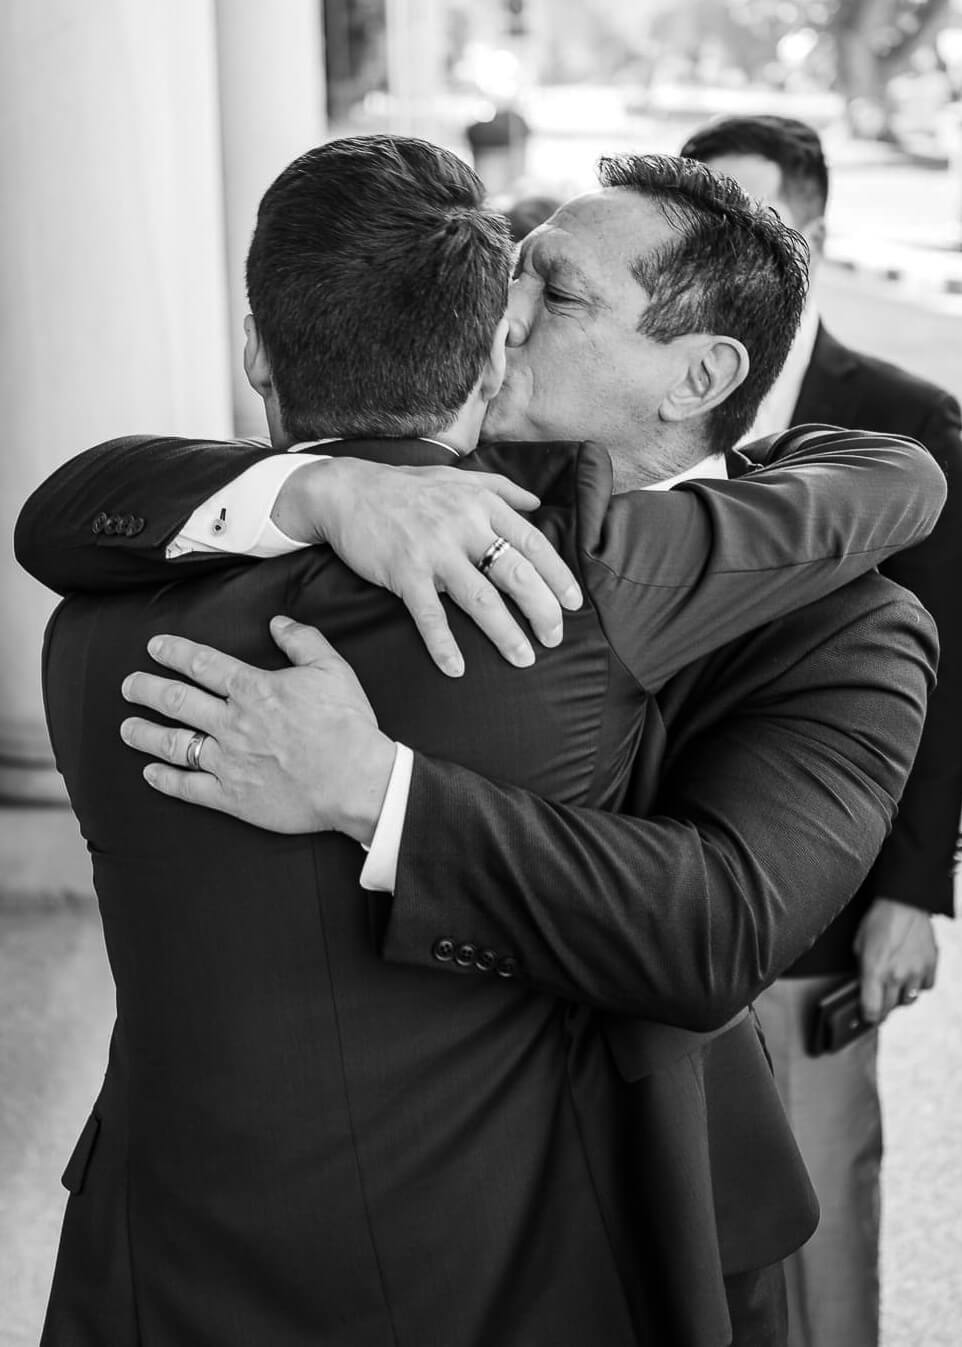 Emotional embrace and kiss on the forehead between father and son in elegant suits at a wedding celebration in the Kurhaus Wiesbaden in black and white.